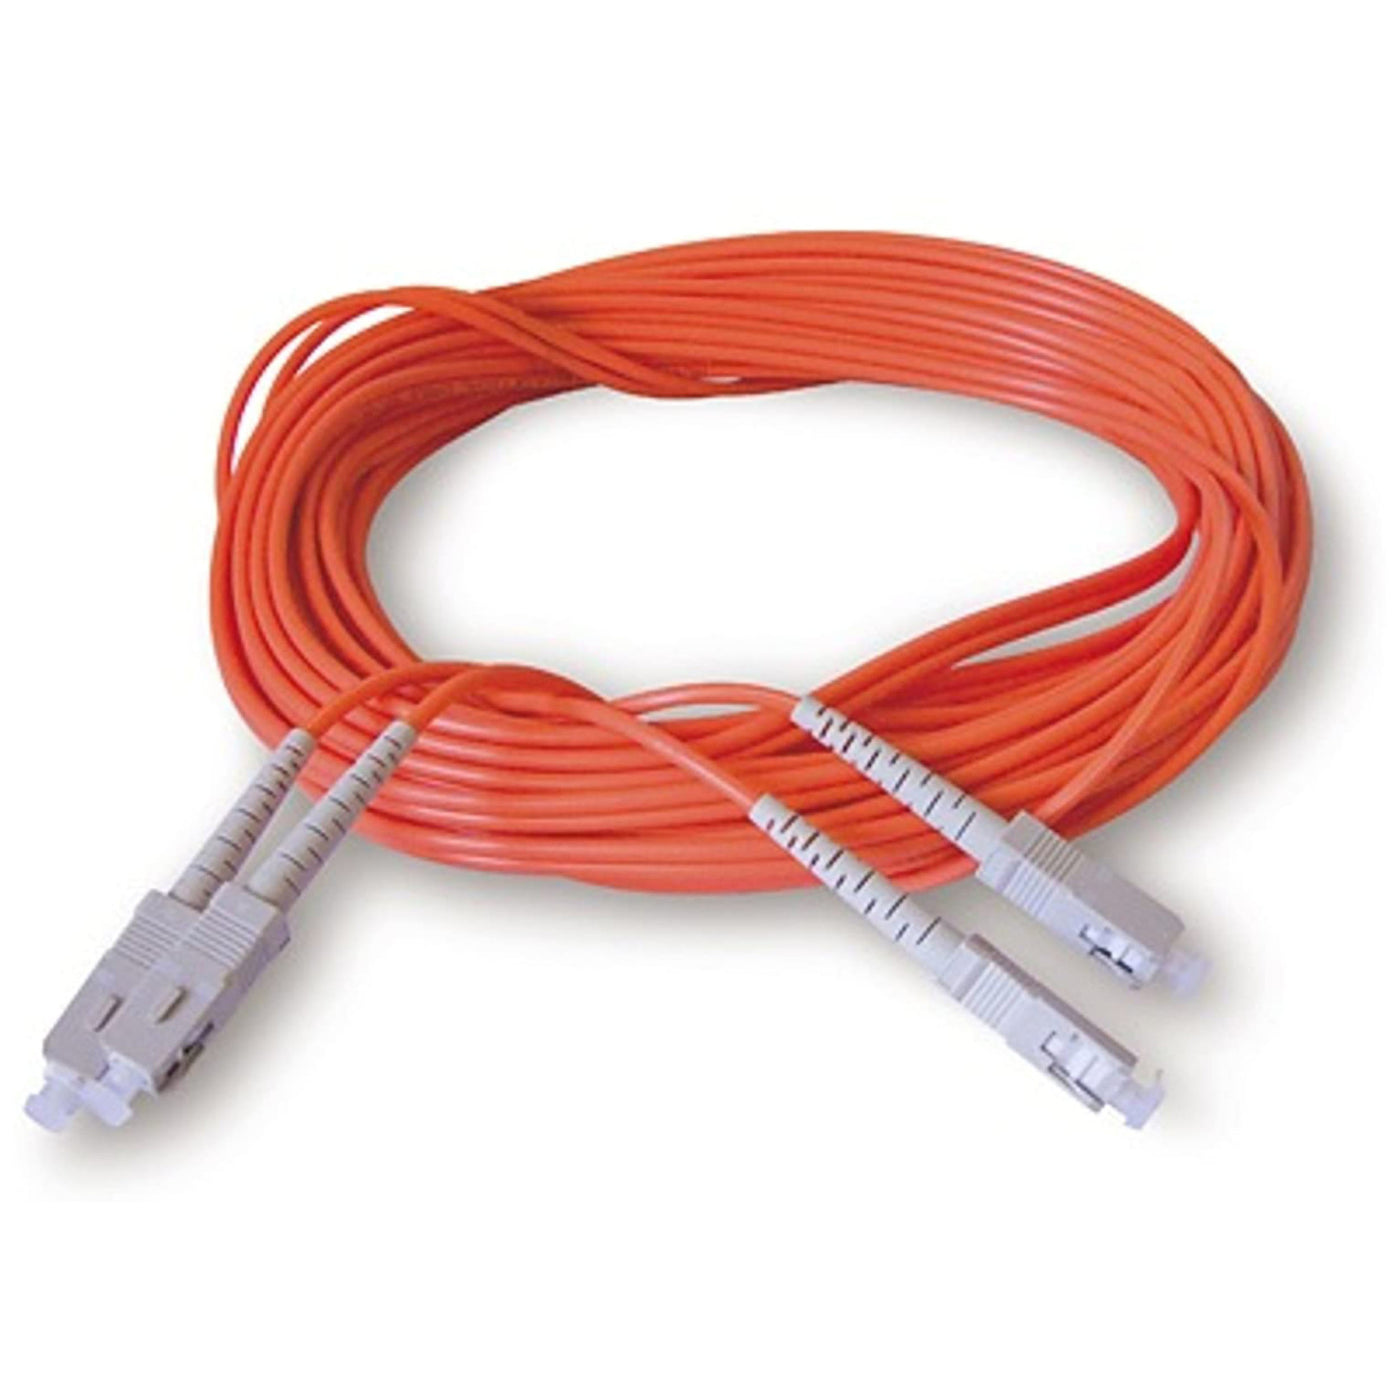 Alva MADI3D Duple MADI Optical Cable for Stage or Studio, 3-Meter